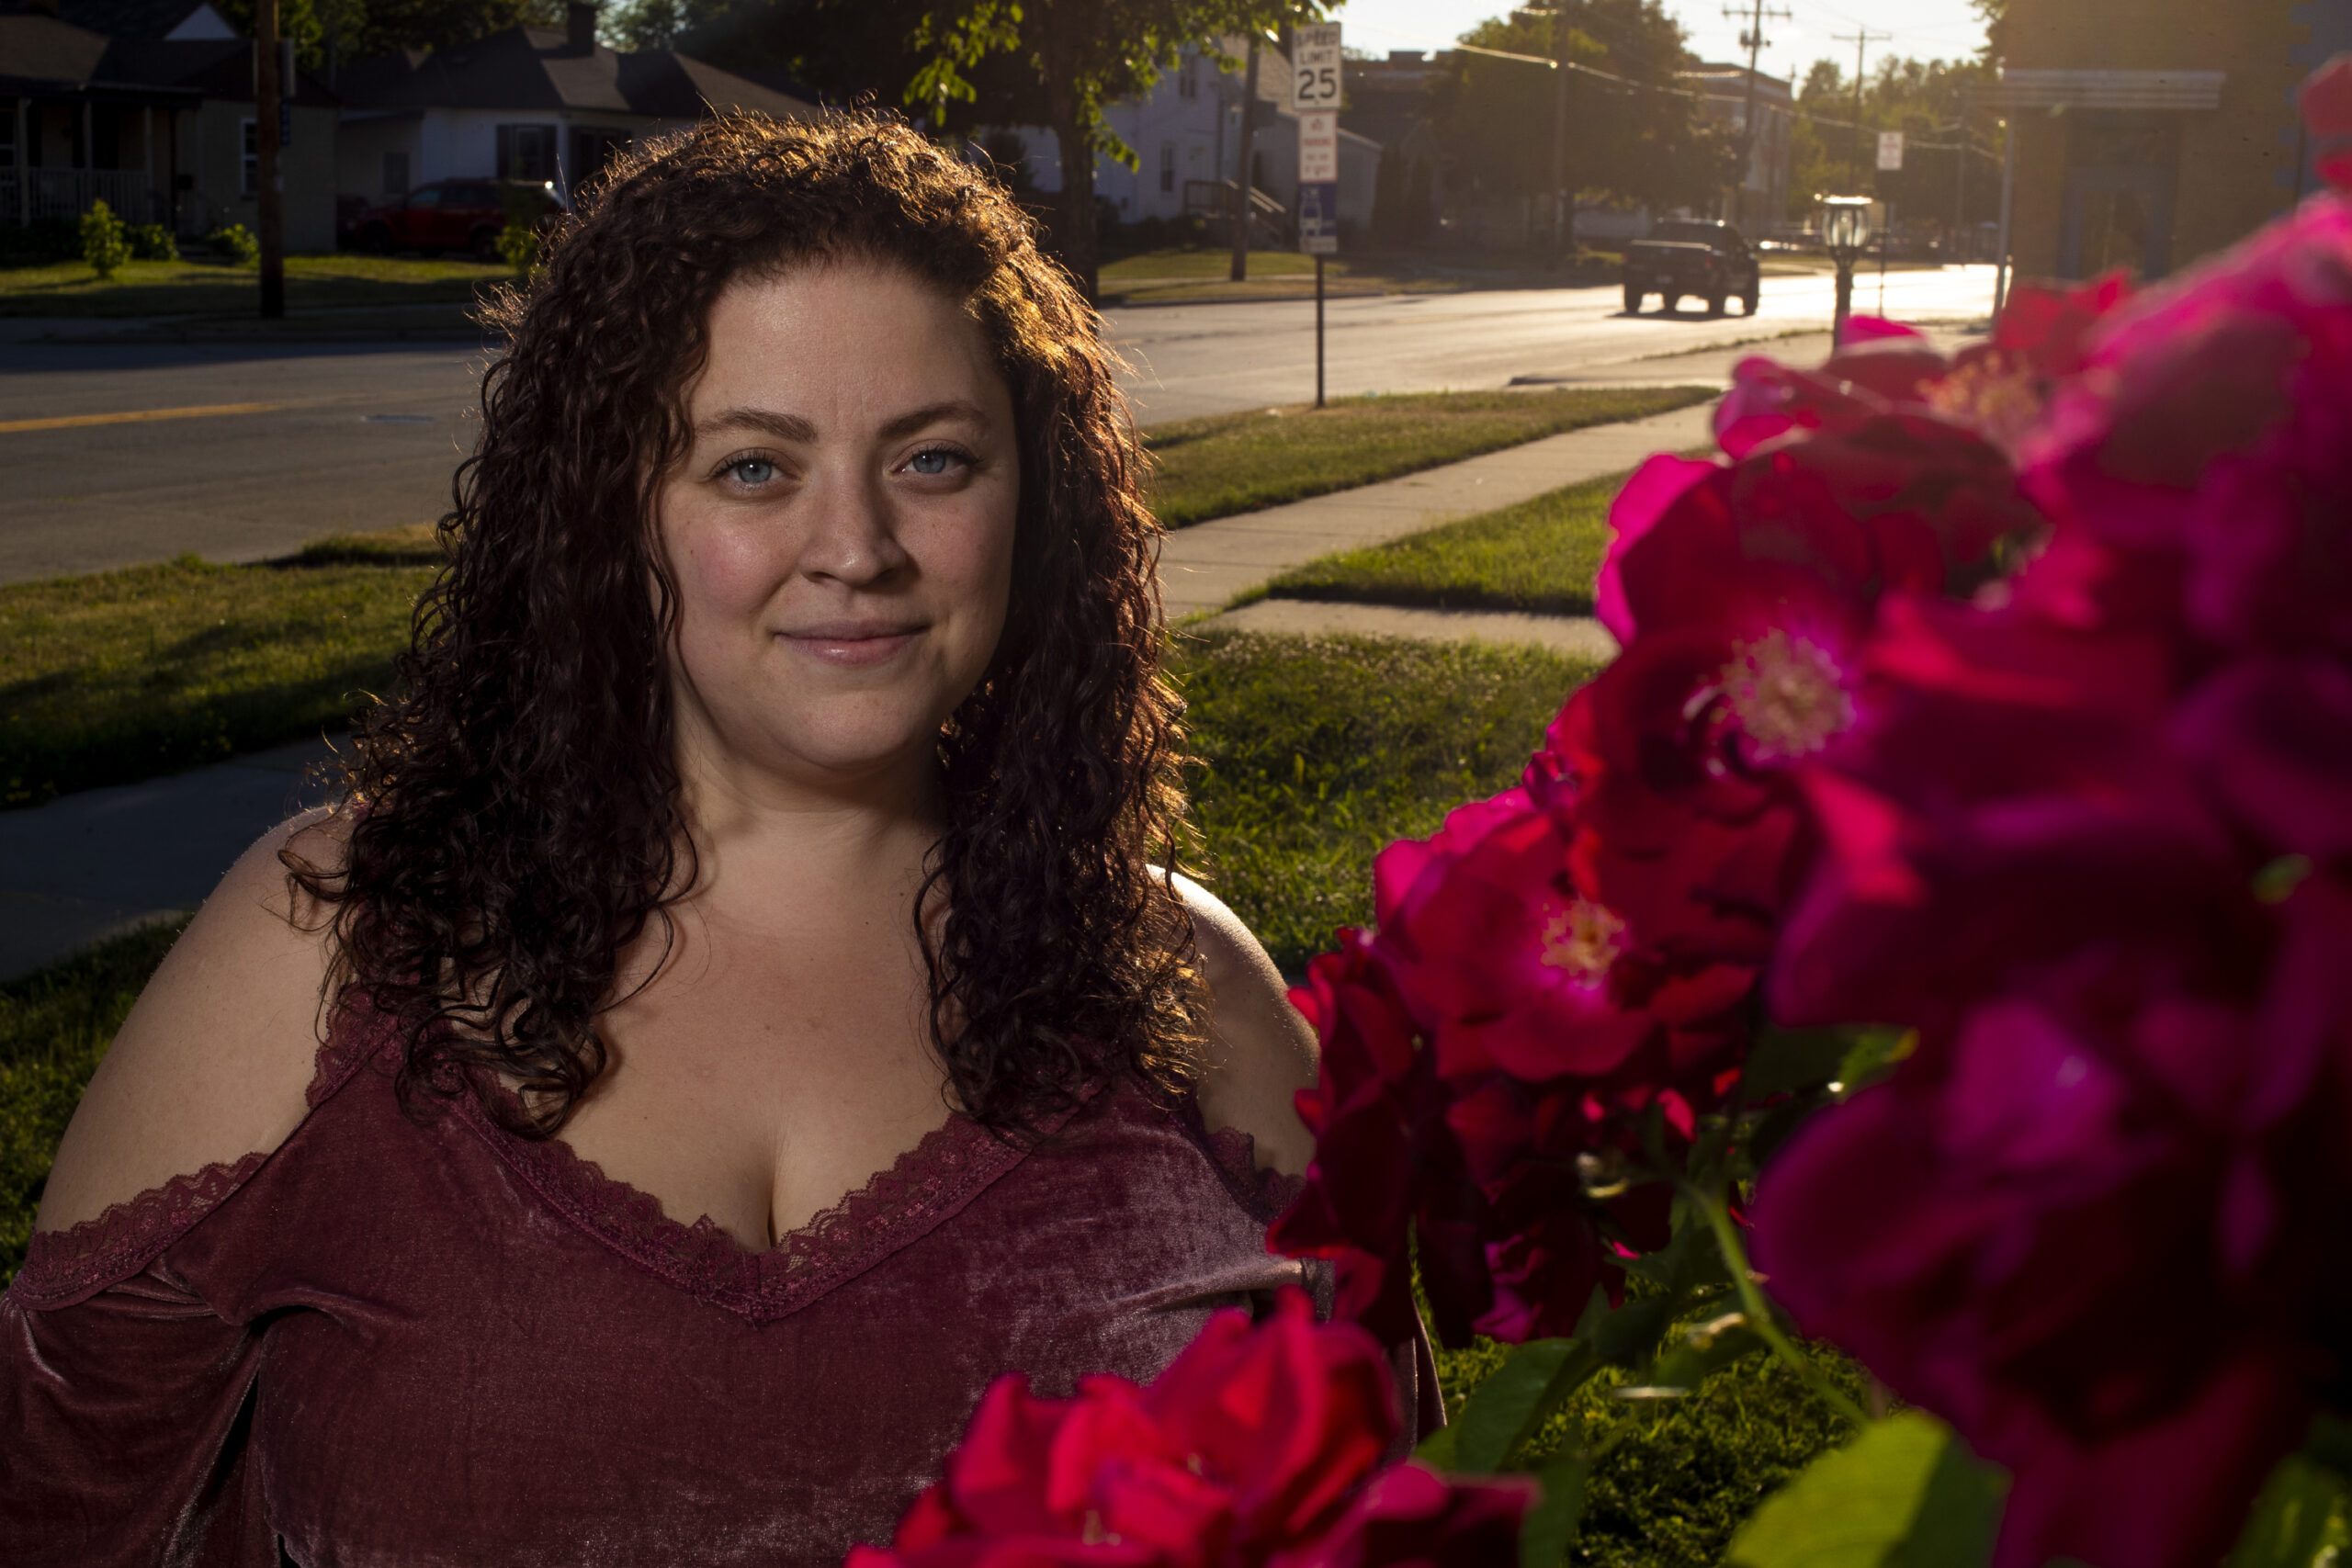 Jaleesa Gray, 28, poses for a portrait outside her home in Green Bay